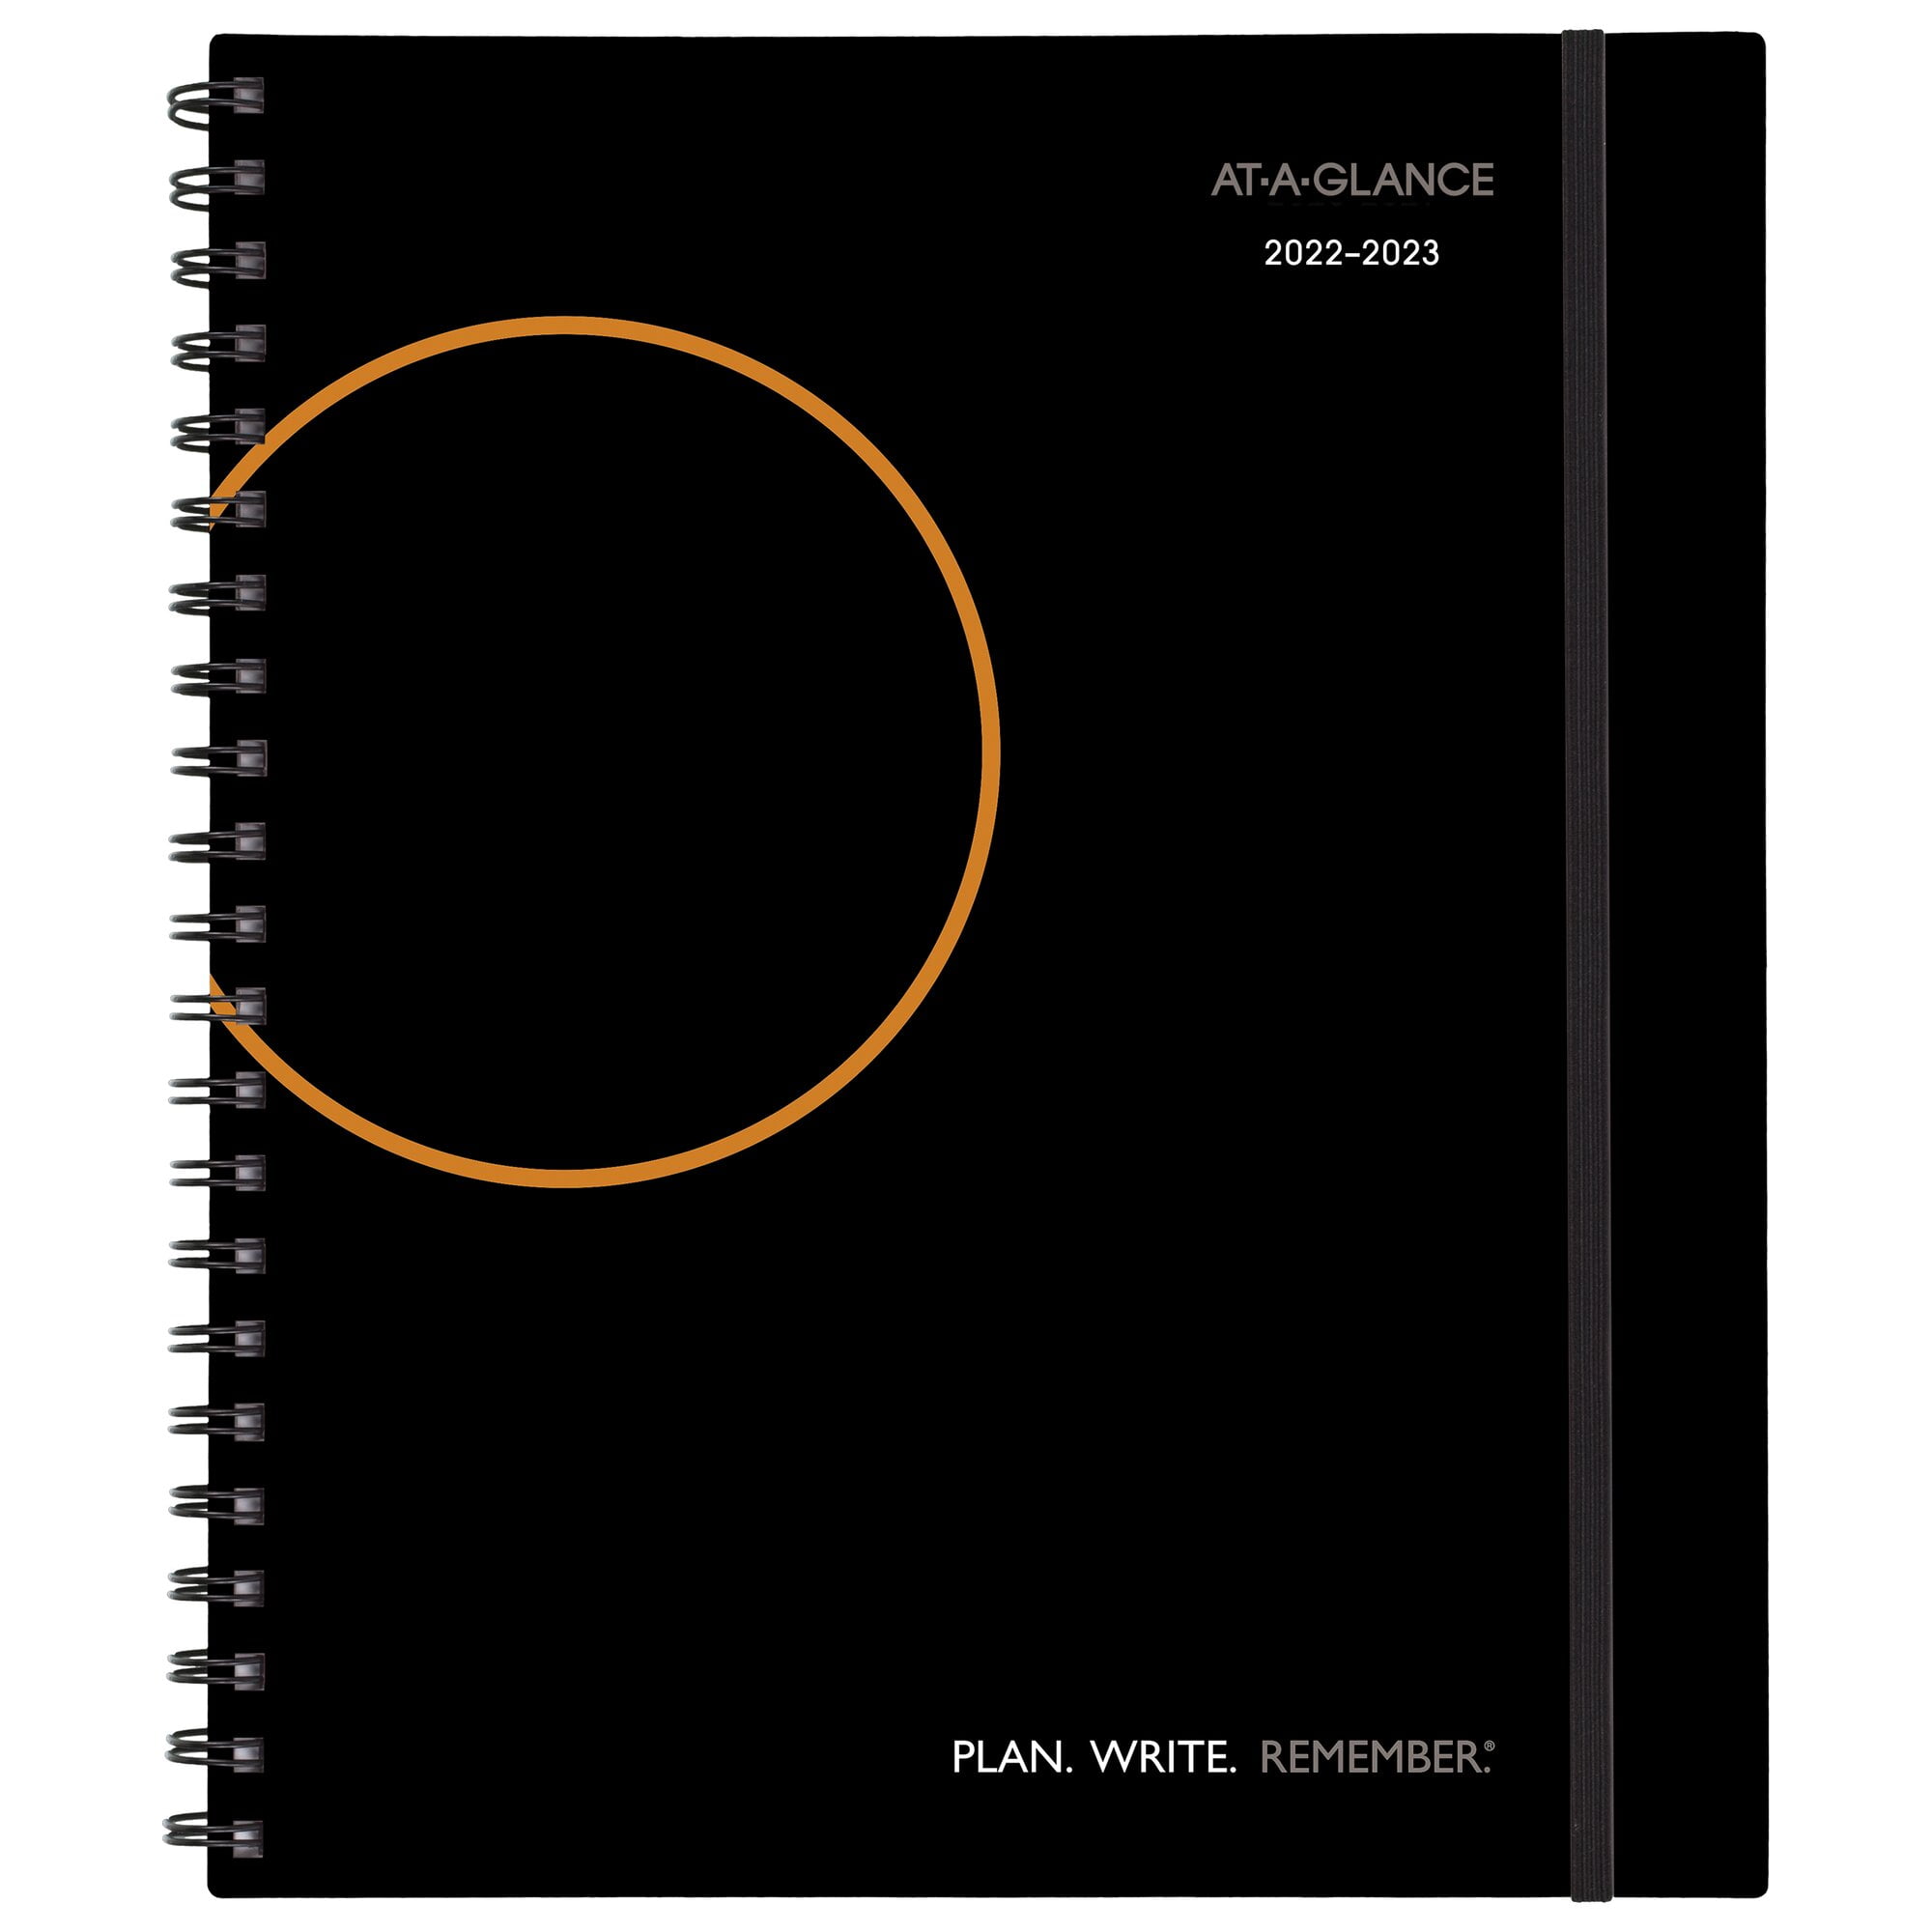 Classic Blue AT-A-GLANCE 2022-2023 Planner 8-1/4 x 11 70957X20 Large Weekly & Monthly Academic Contempo 